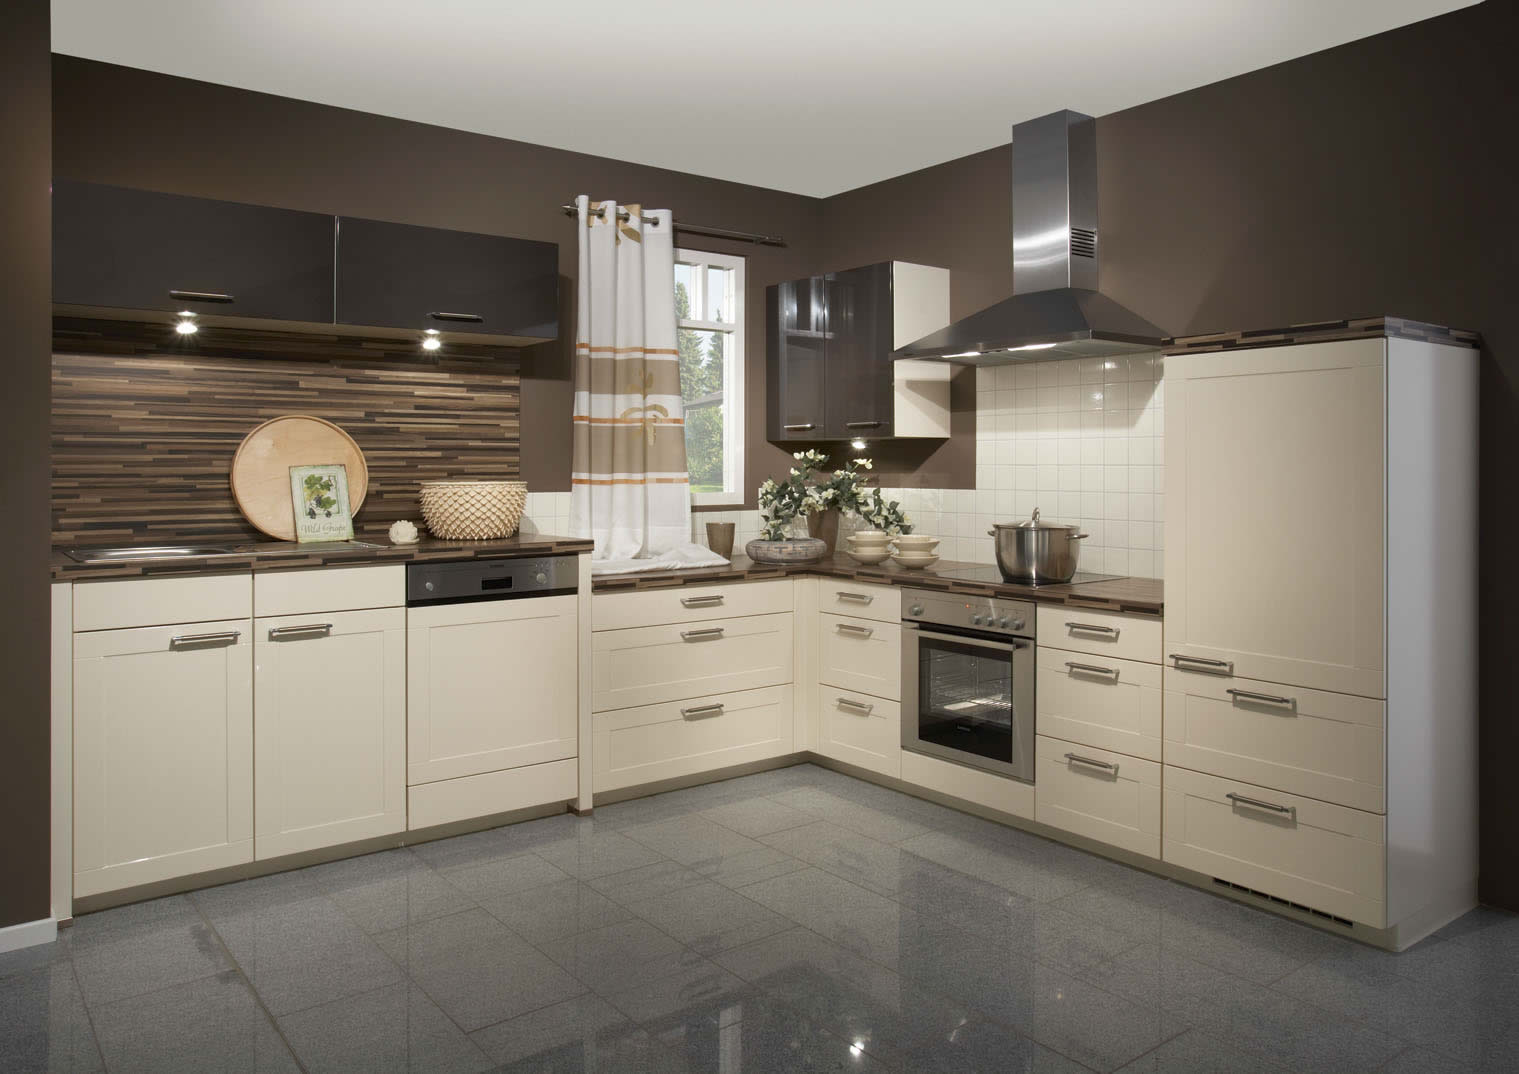 Nice High Gloss Kitchen Cabinets And Tiles